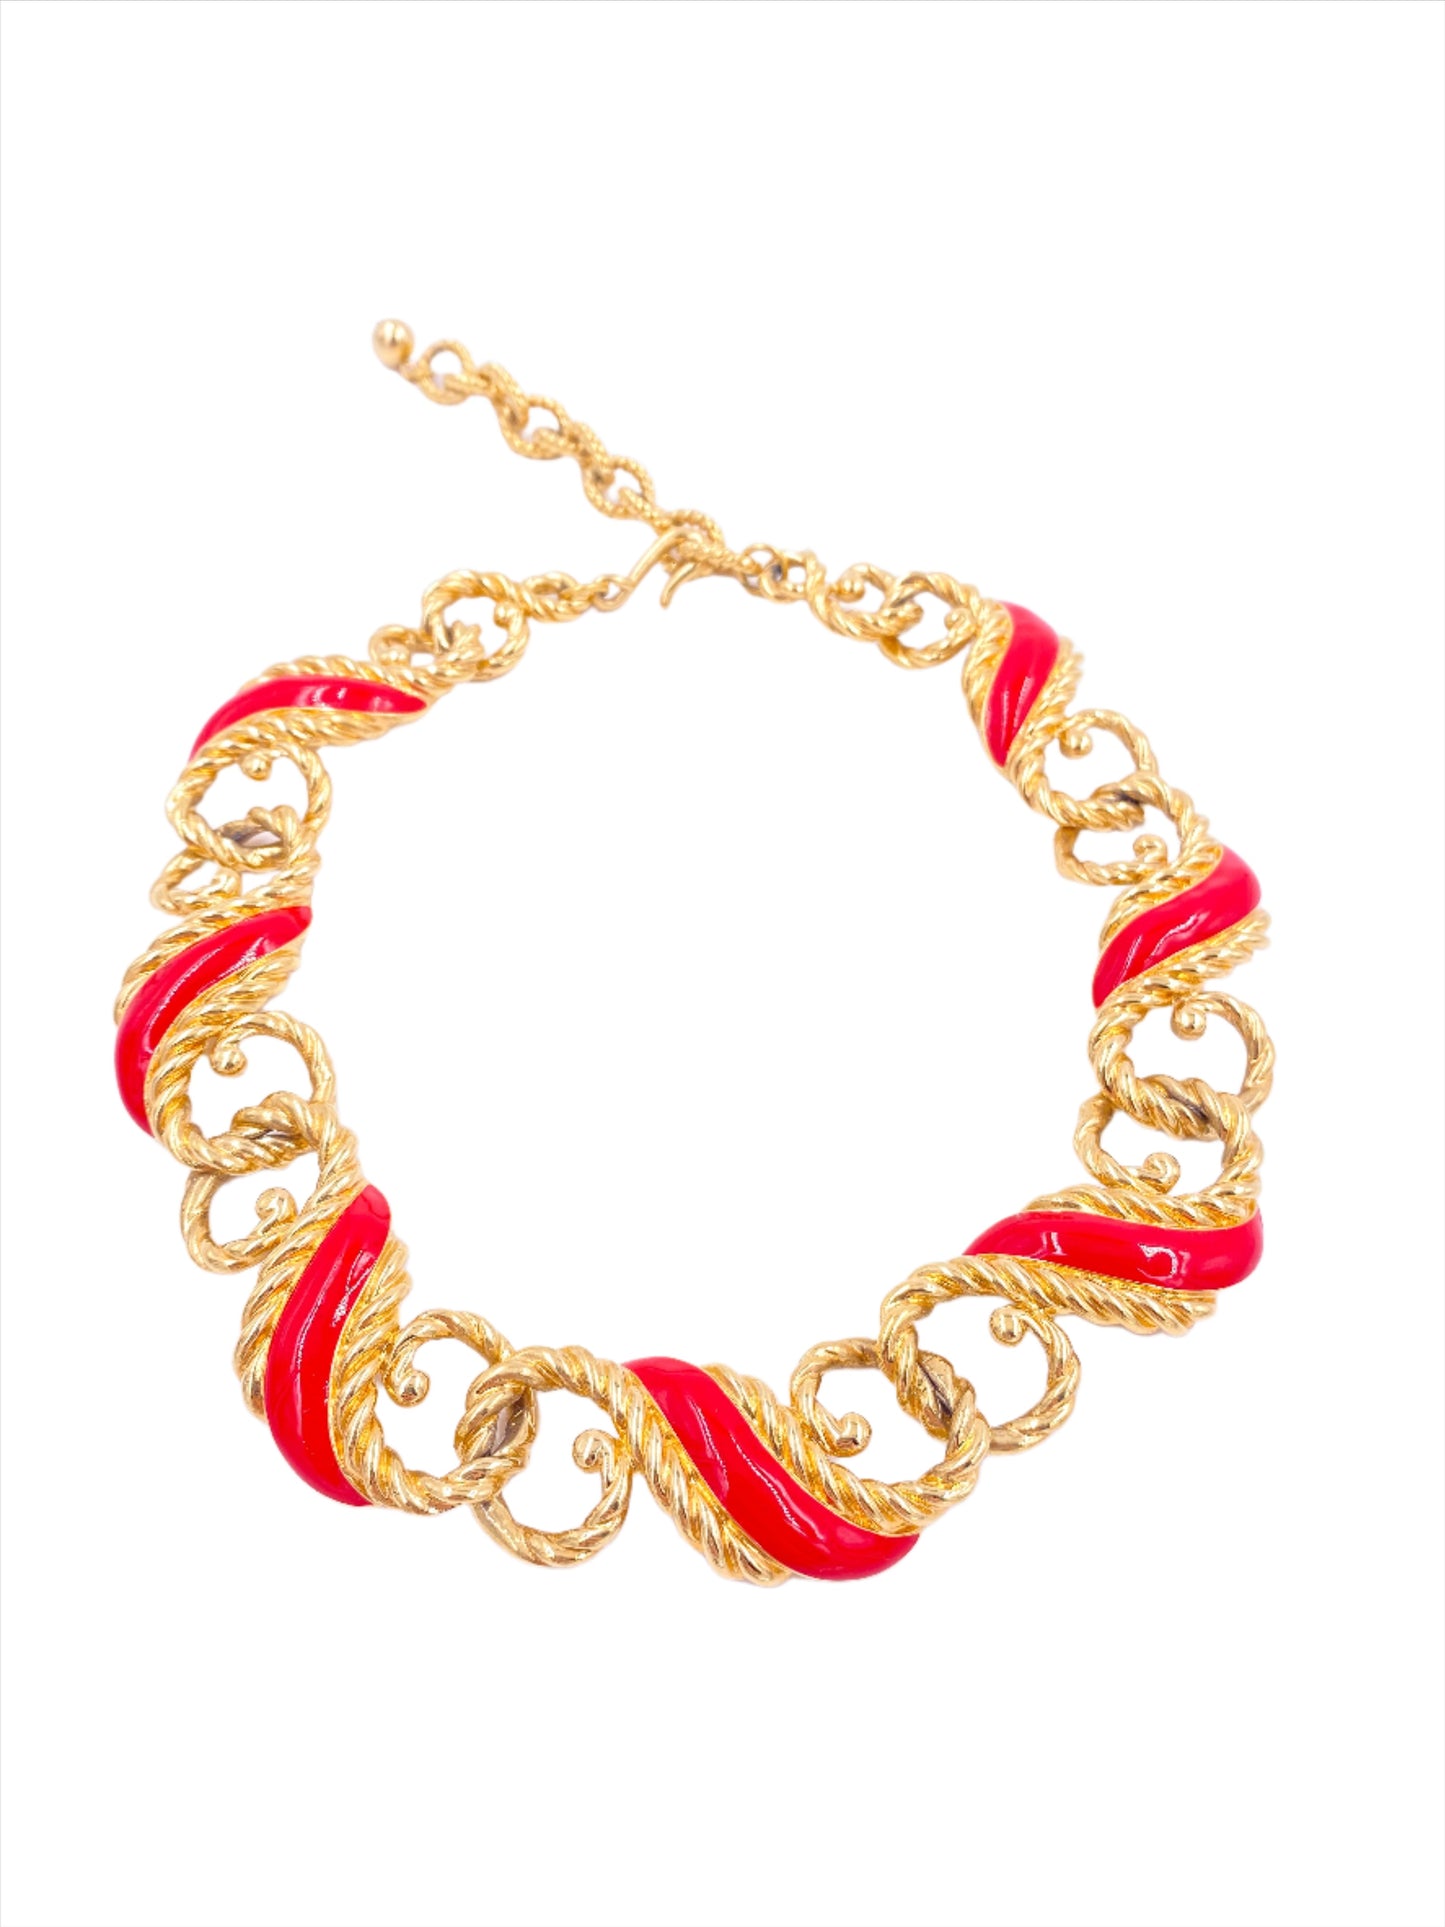 Gold and Red Enamel Necklace